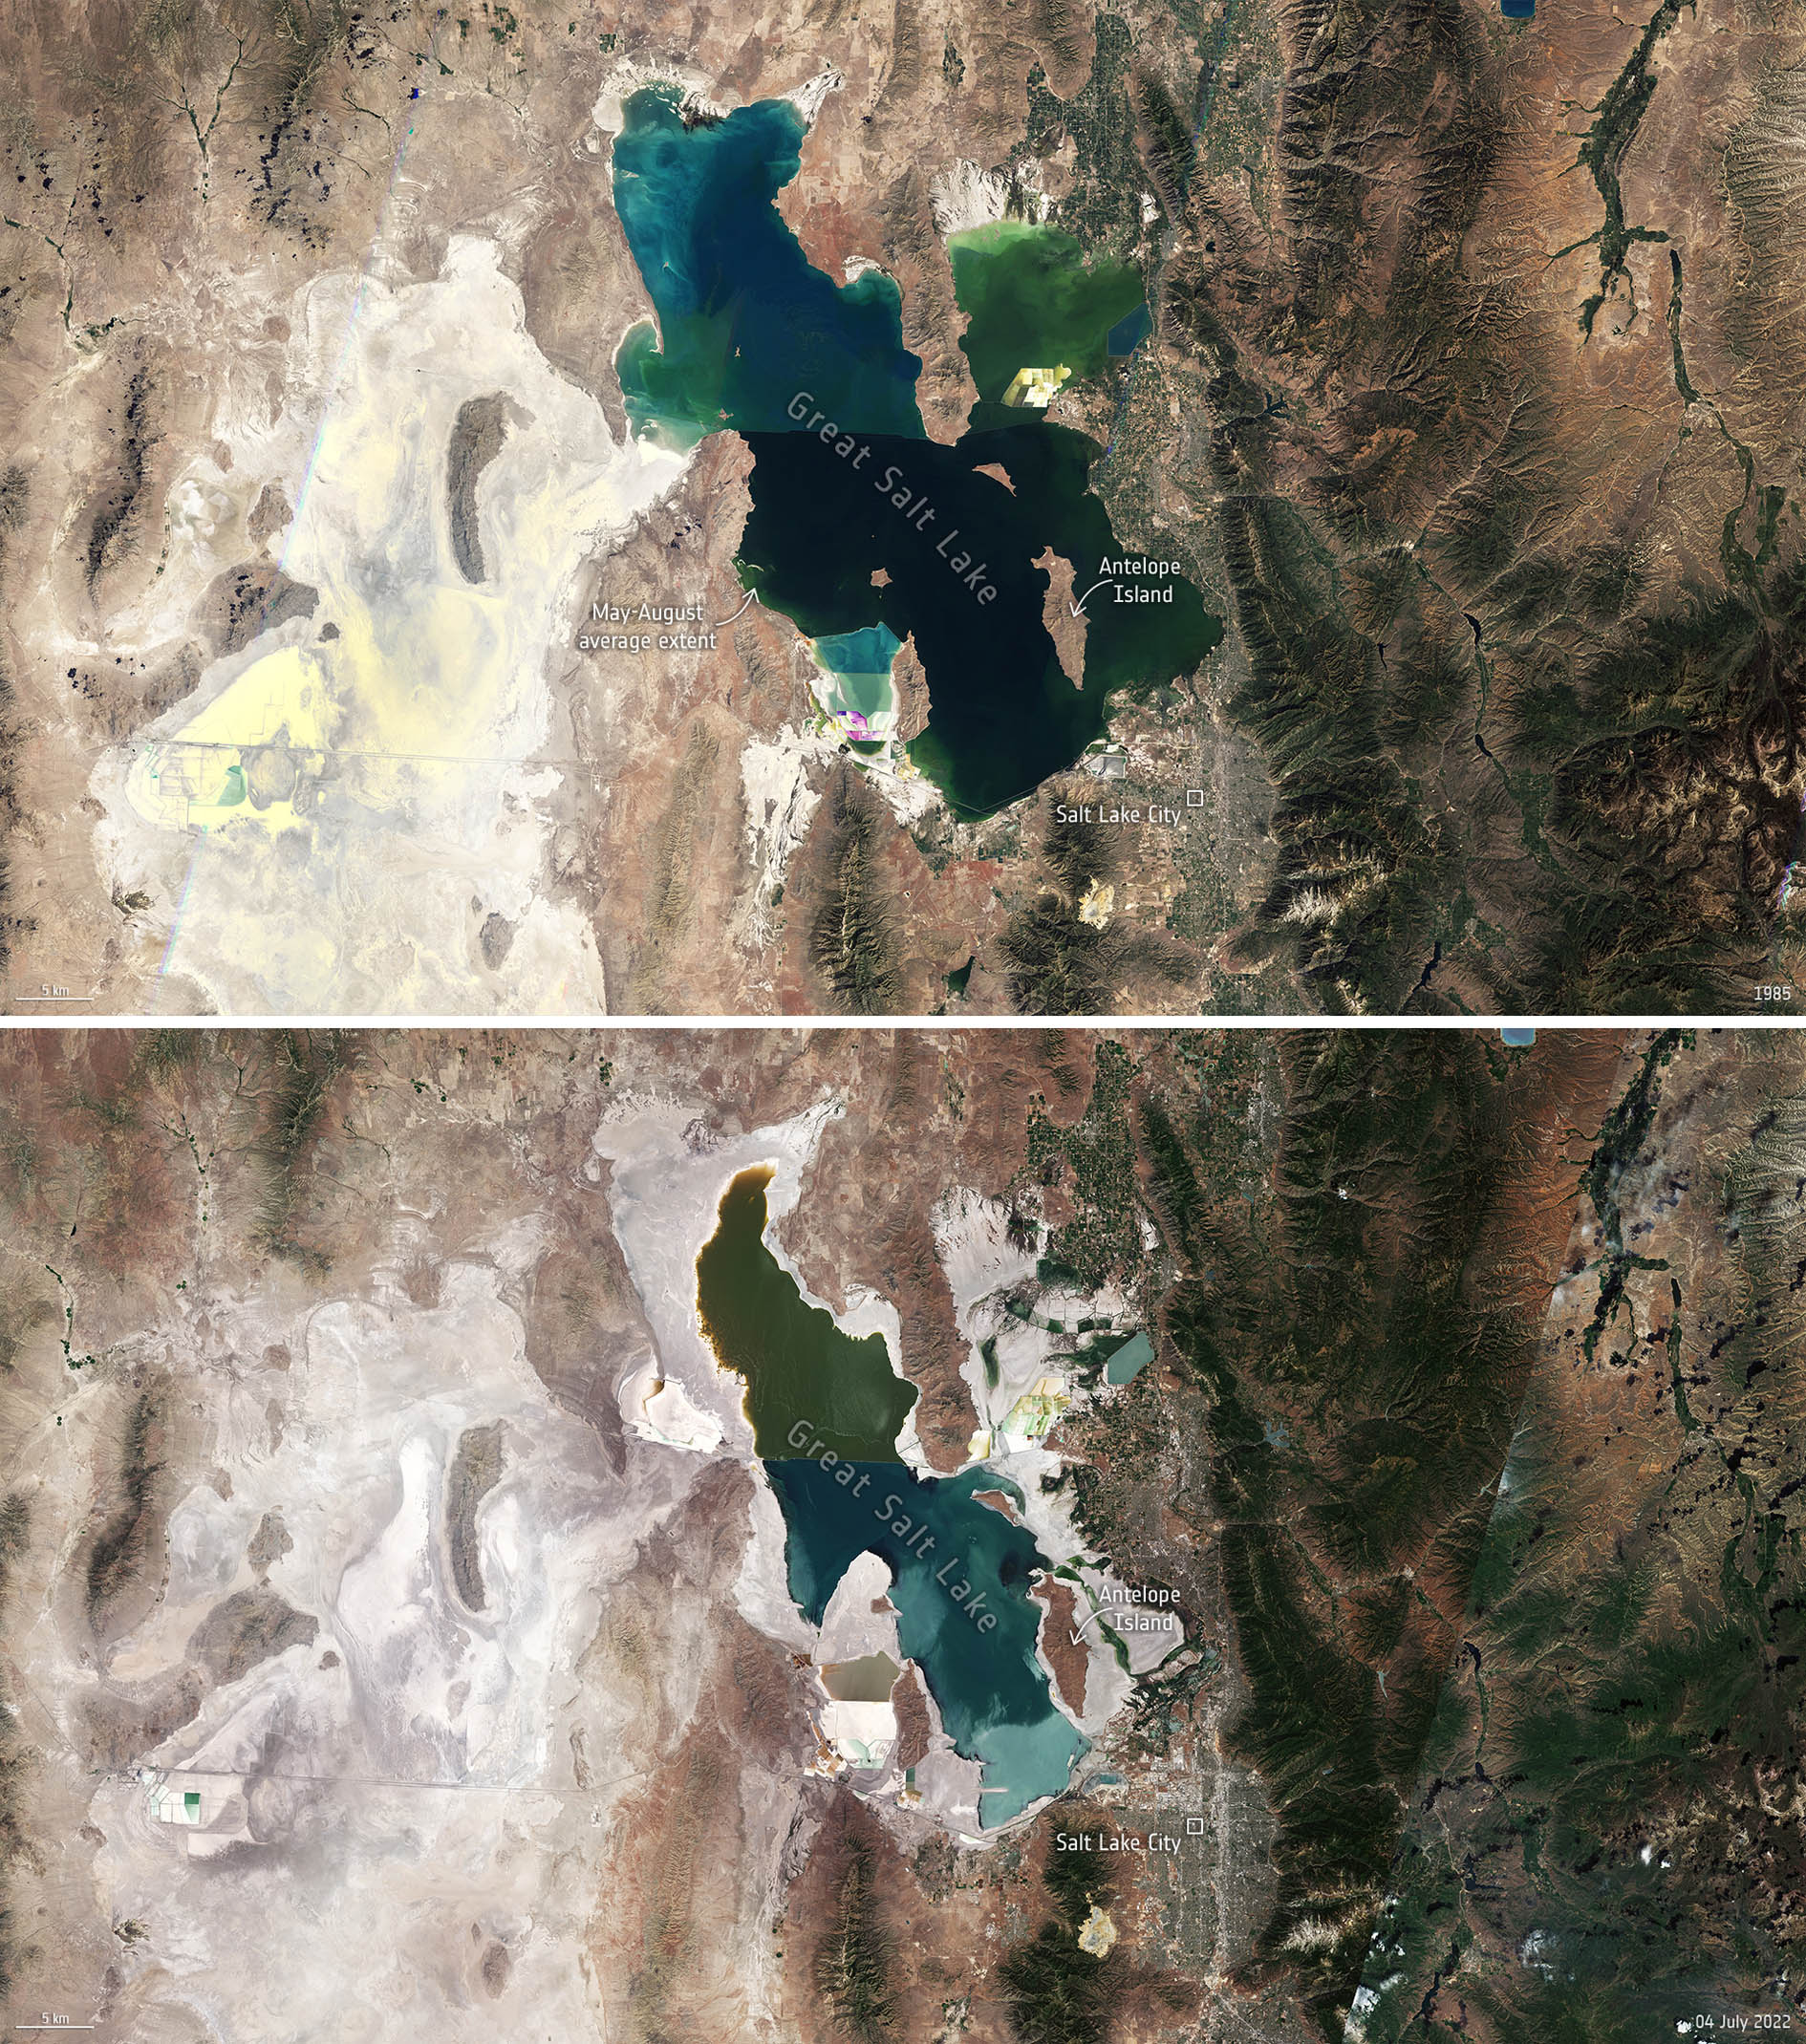 https://www.esa.int/Applications/Observing_the_Earth/Copernicus/Utah_s_Great_Salt_Lake_is_disappearing